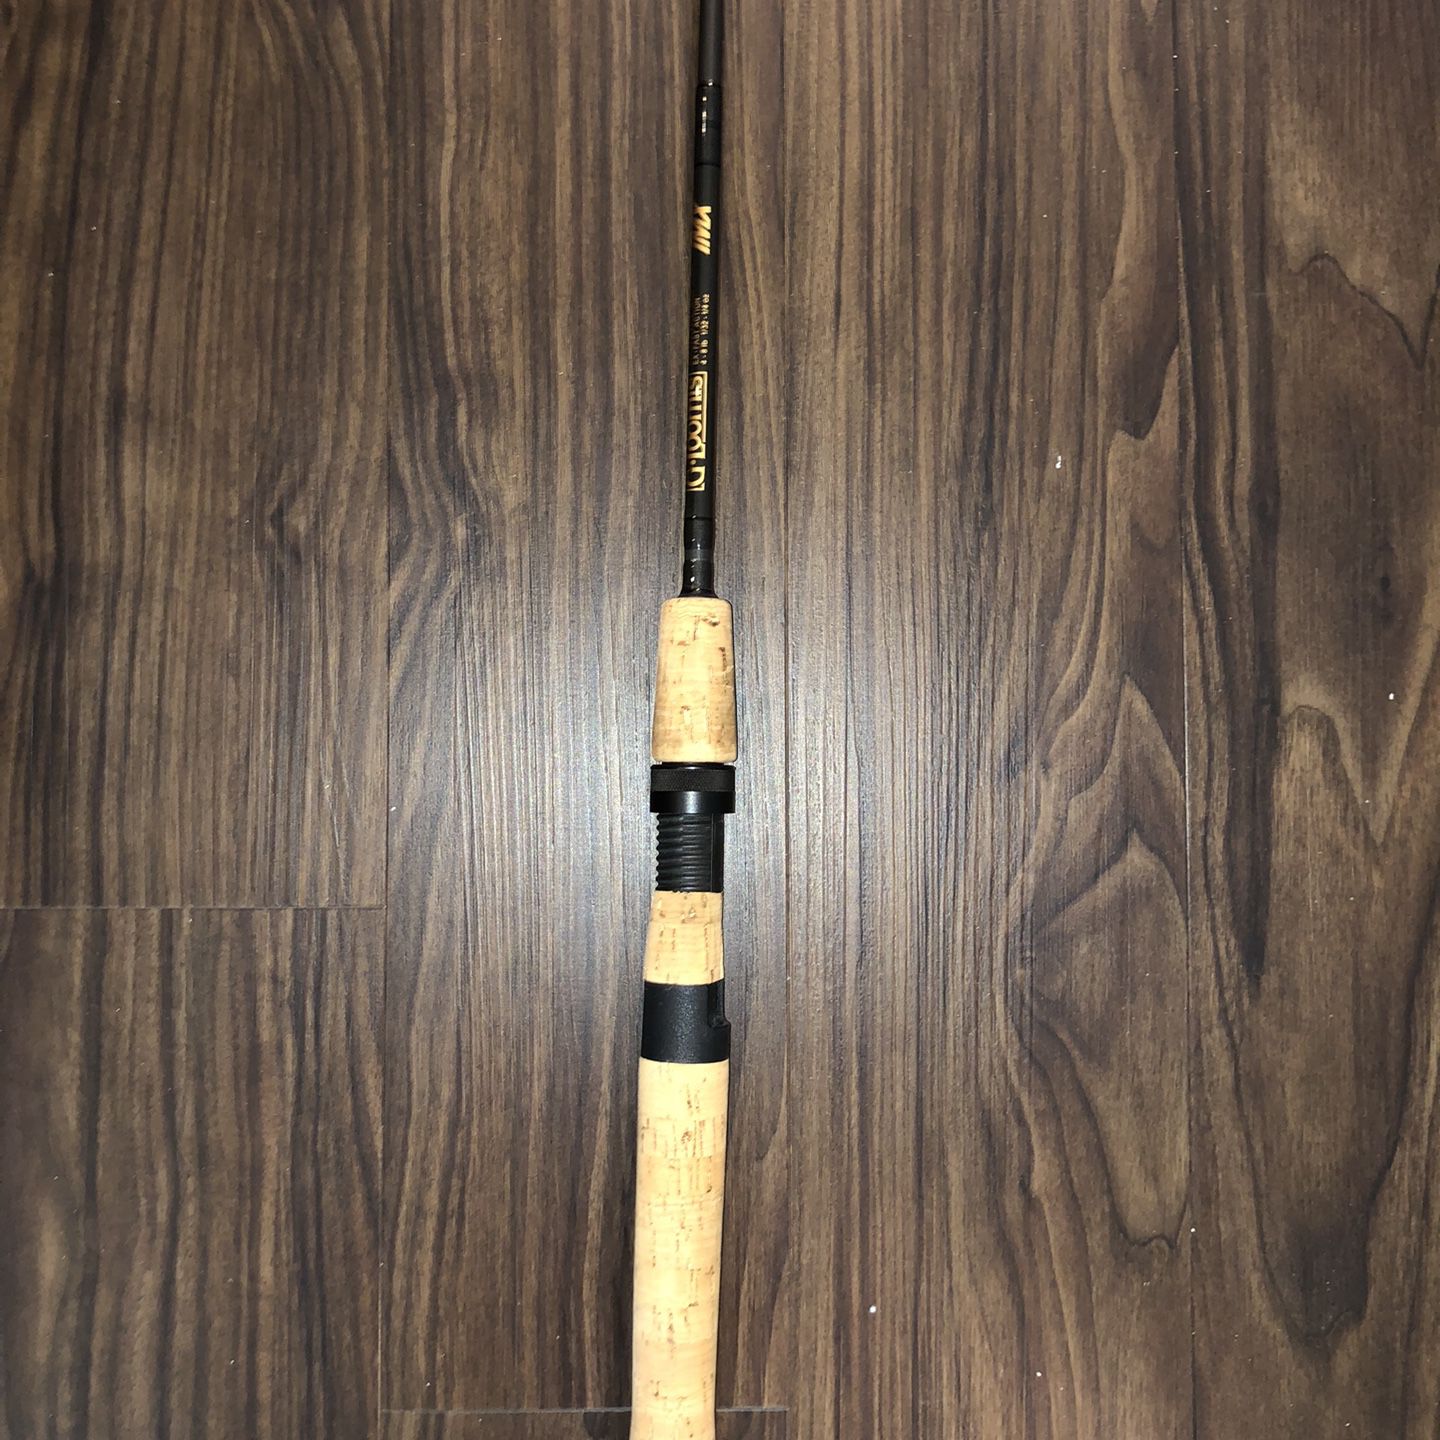 G.Loomis IMX SJR 720 Fishing Rod for Sale in Vernon Hills, IL - OfferUp